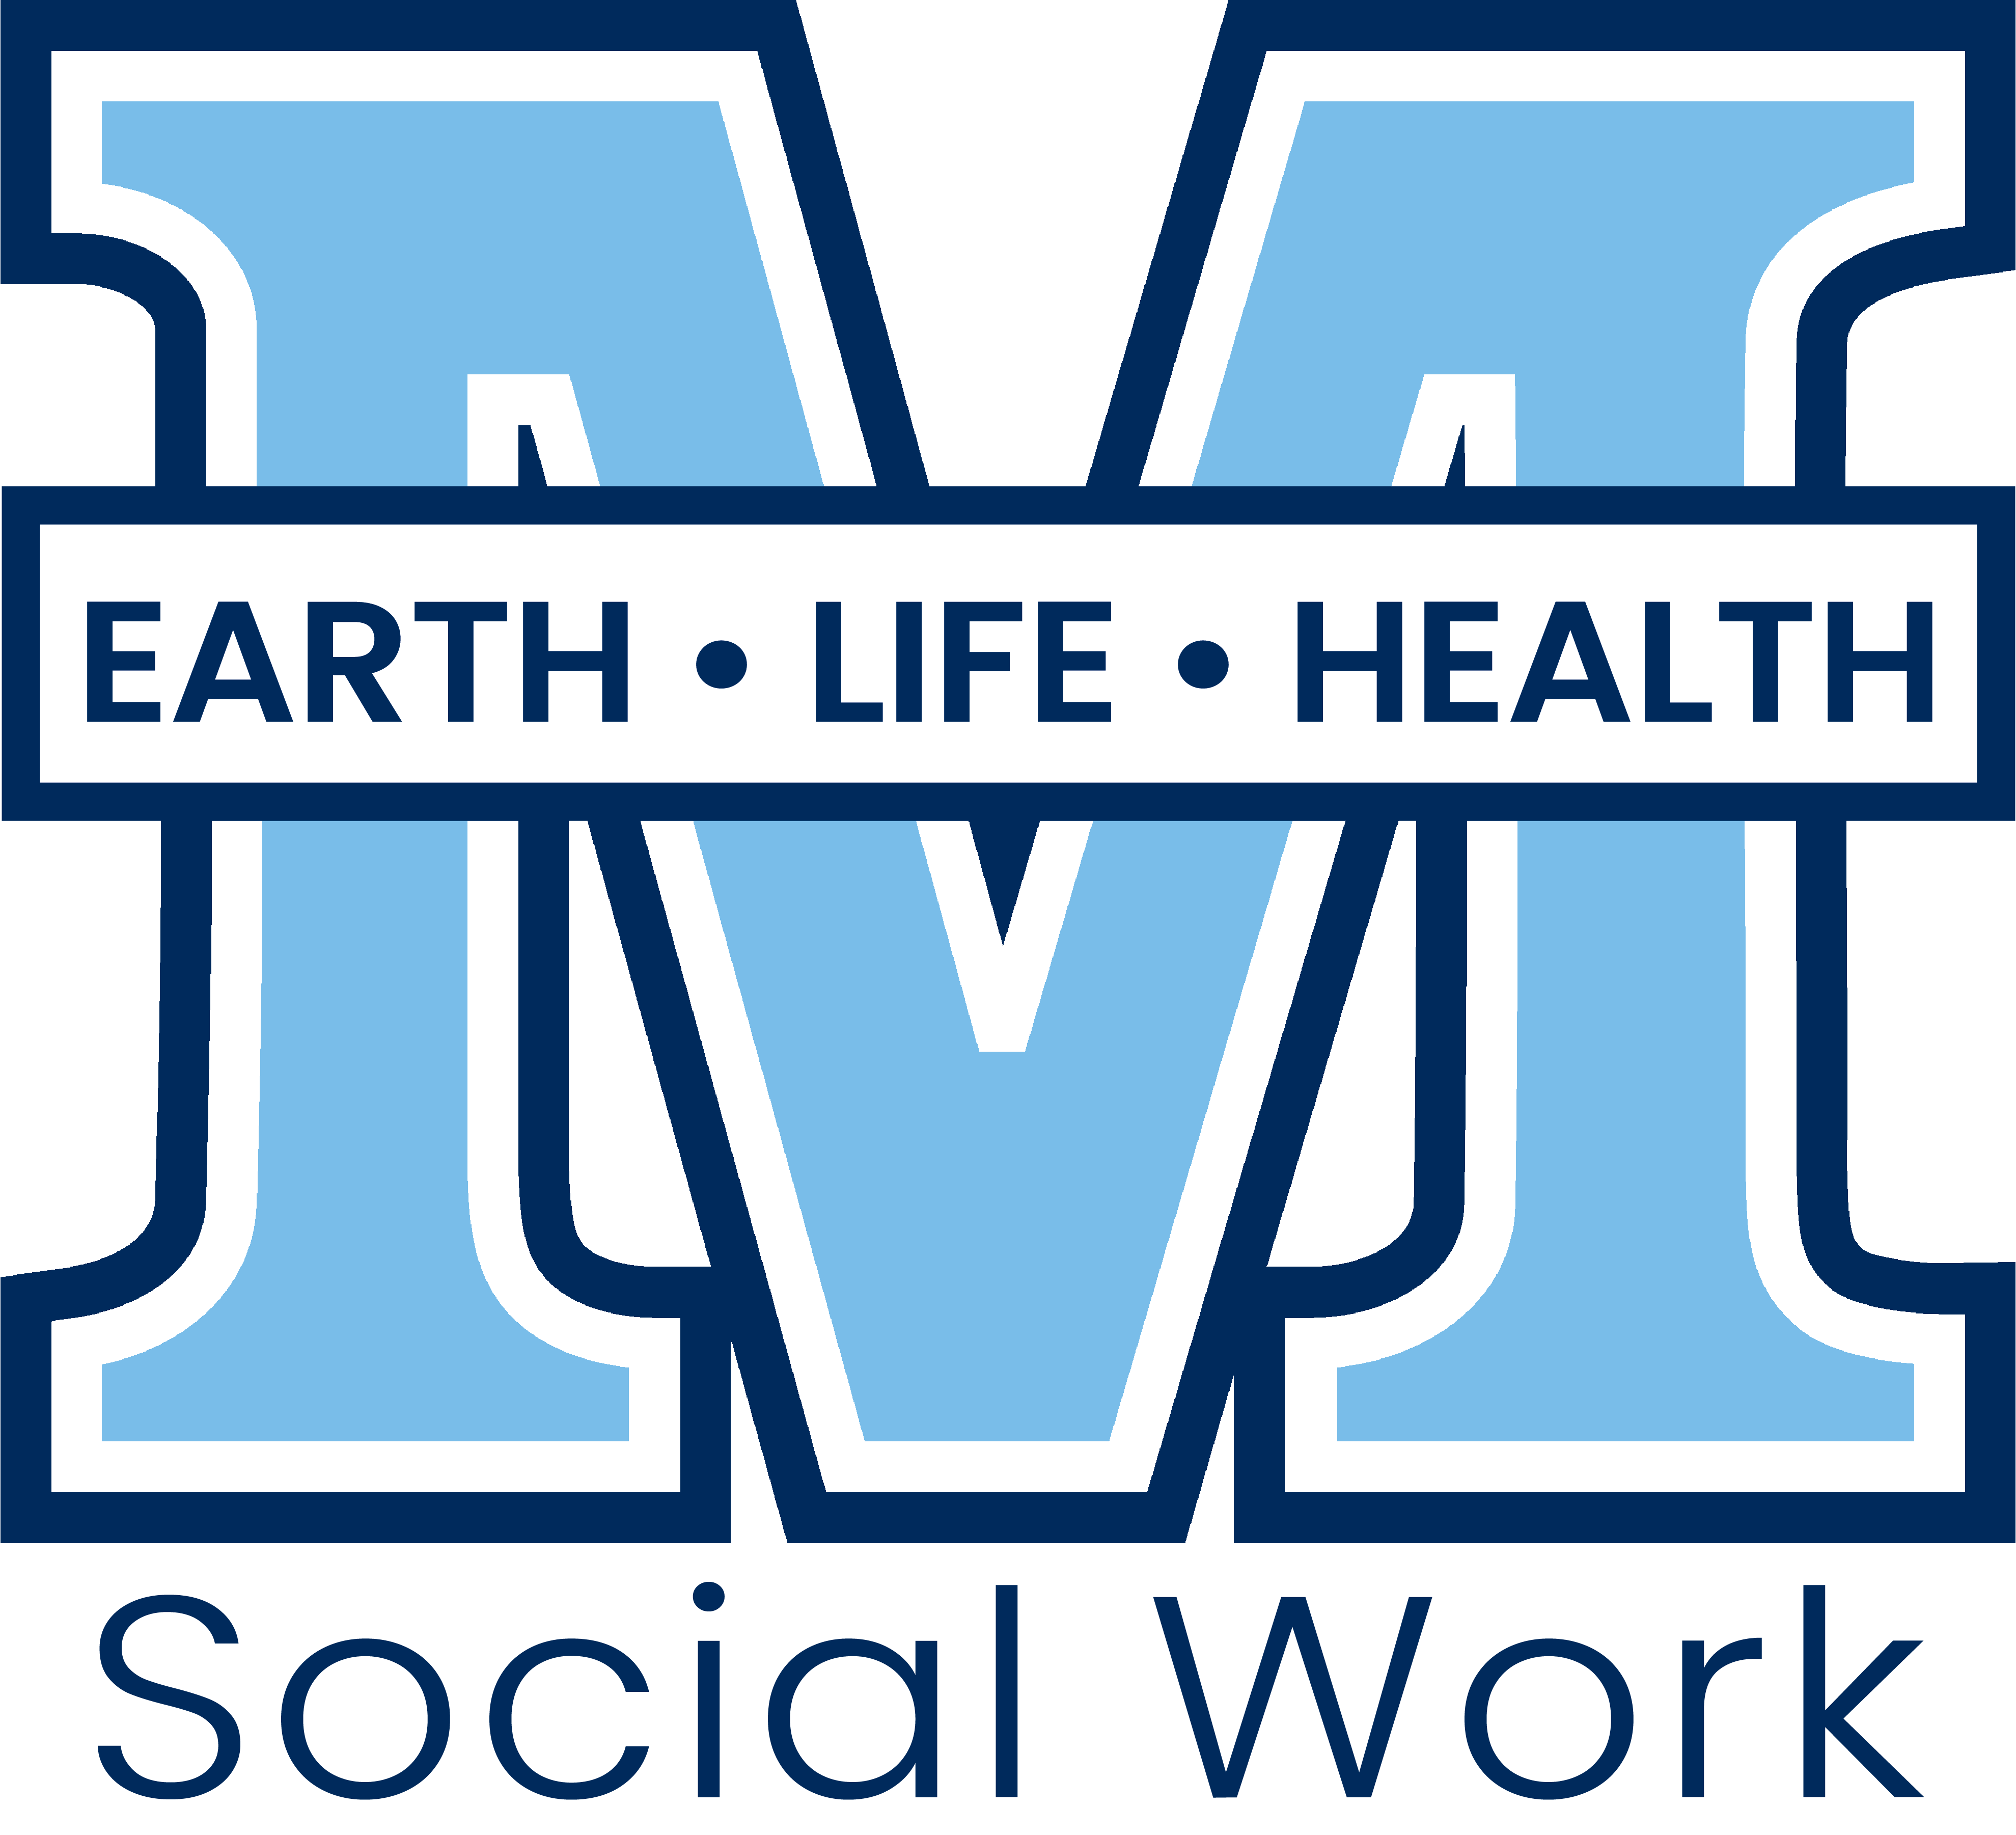 College M logo with social work